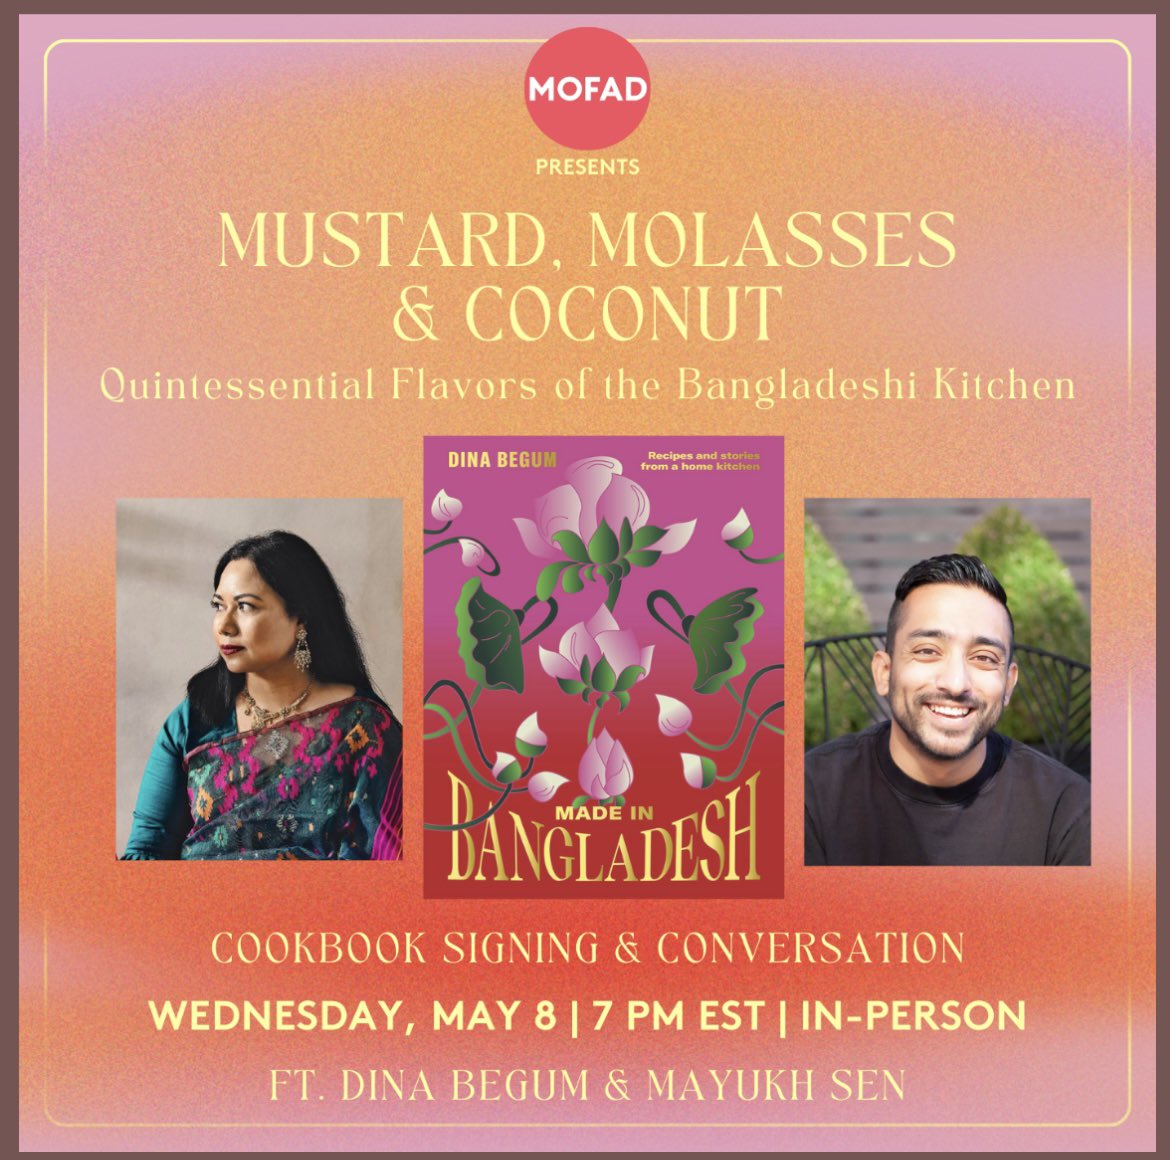 My first NYC event is at @mofad where I’ll be chatting to my friend @senatormayukh - tickets linked below! There’ll be conversation, snacks & you’ll be able to get signed copy of #madeinbangladesh @HardieGrant mofad.org/calendar/musta…